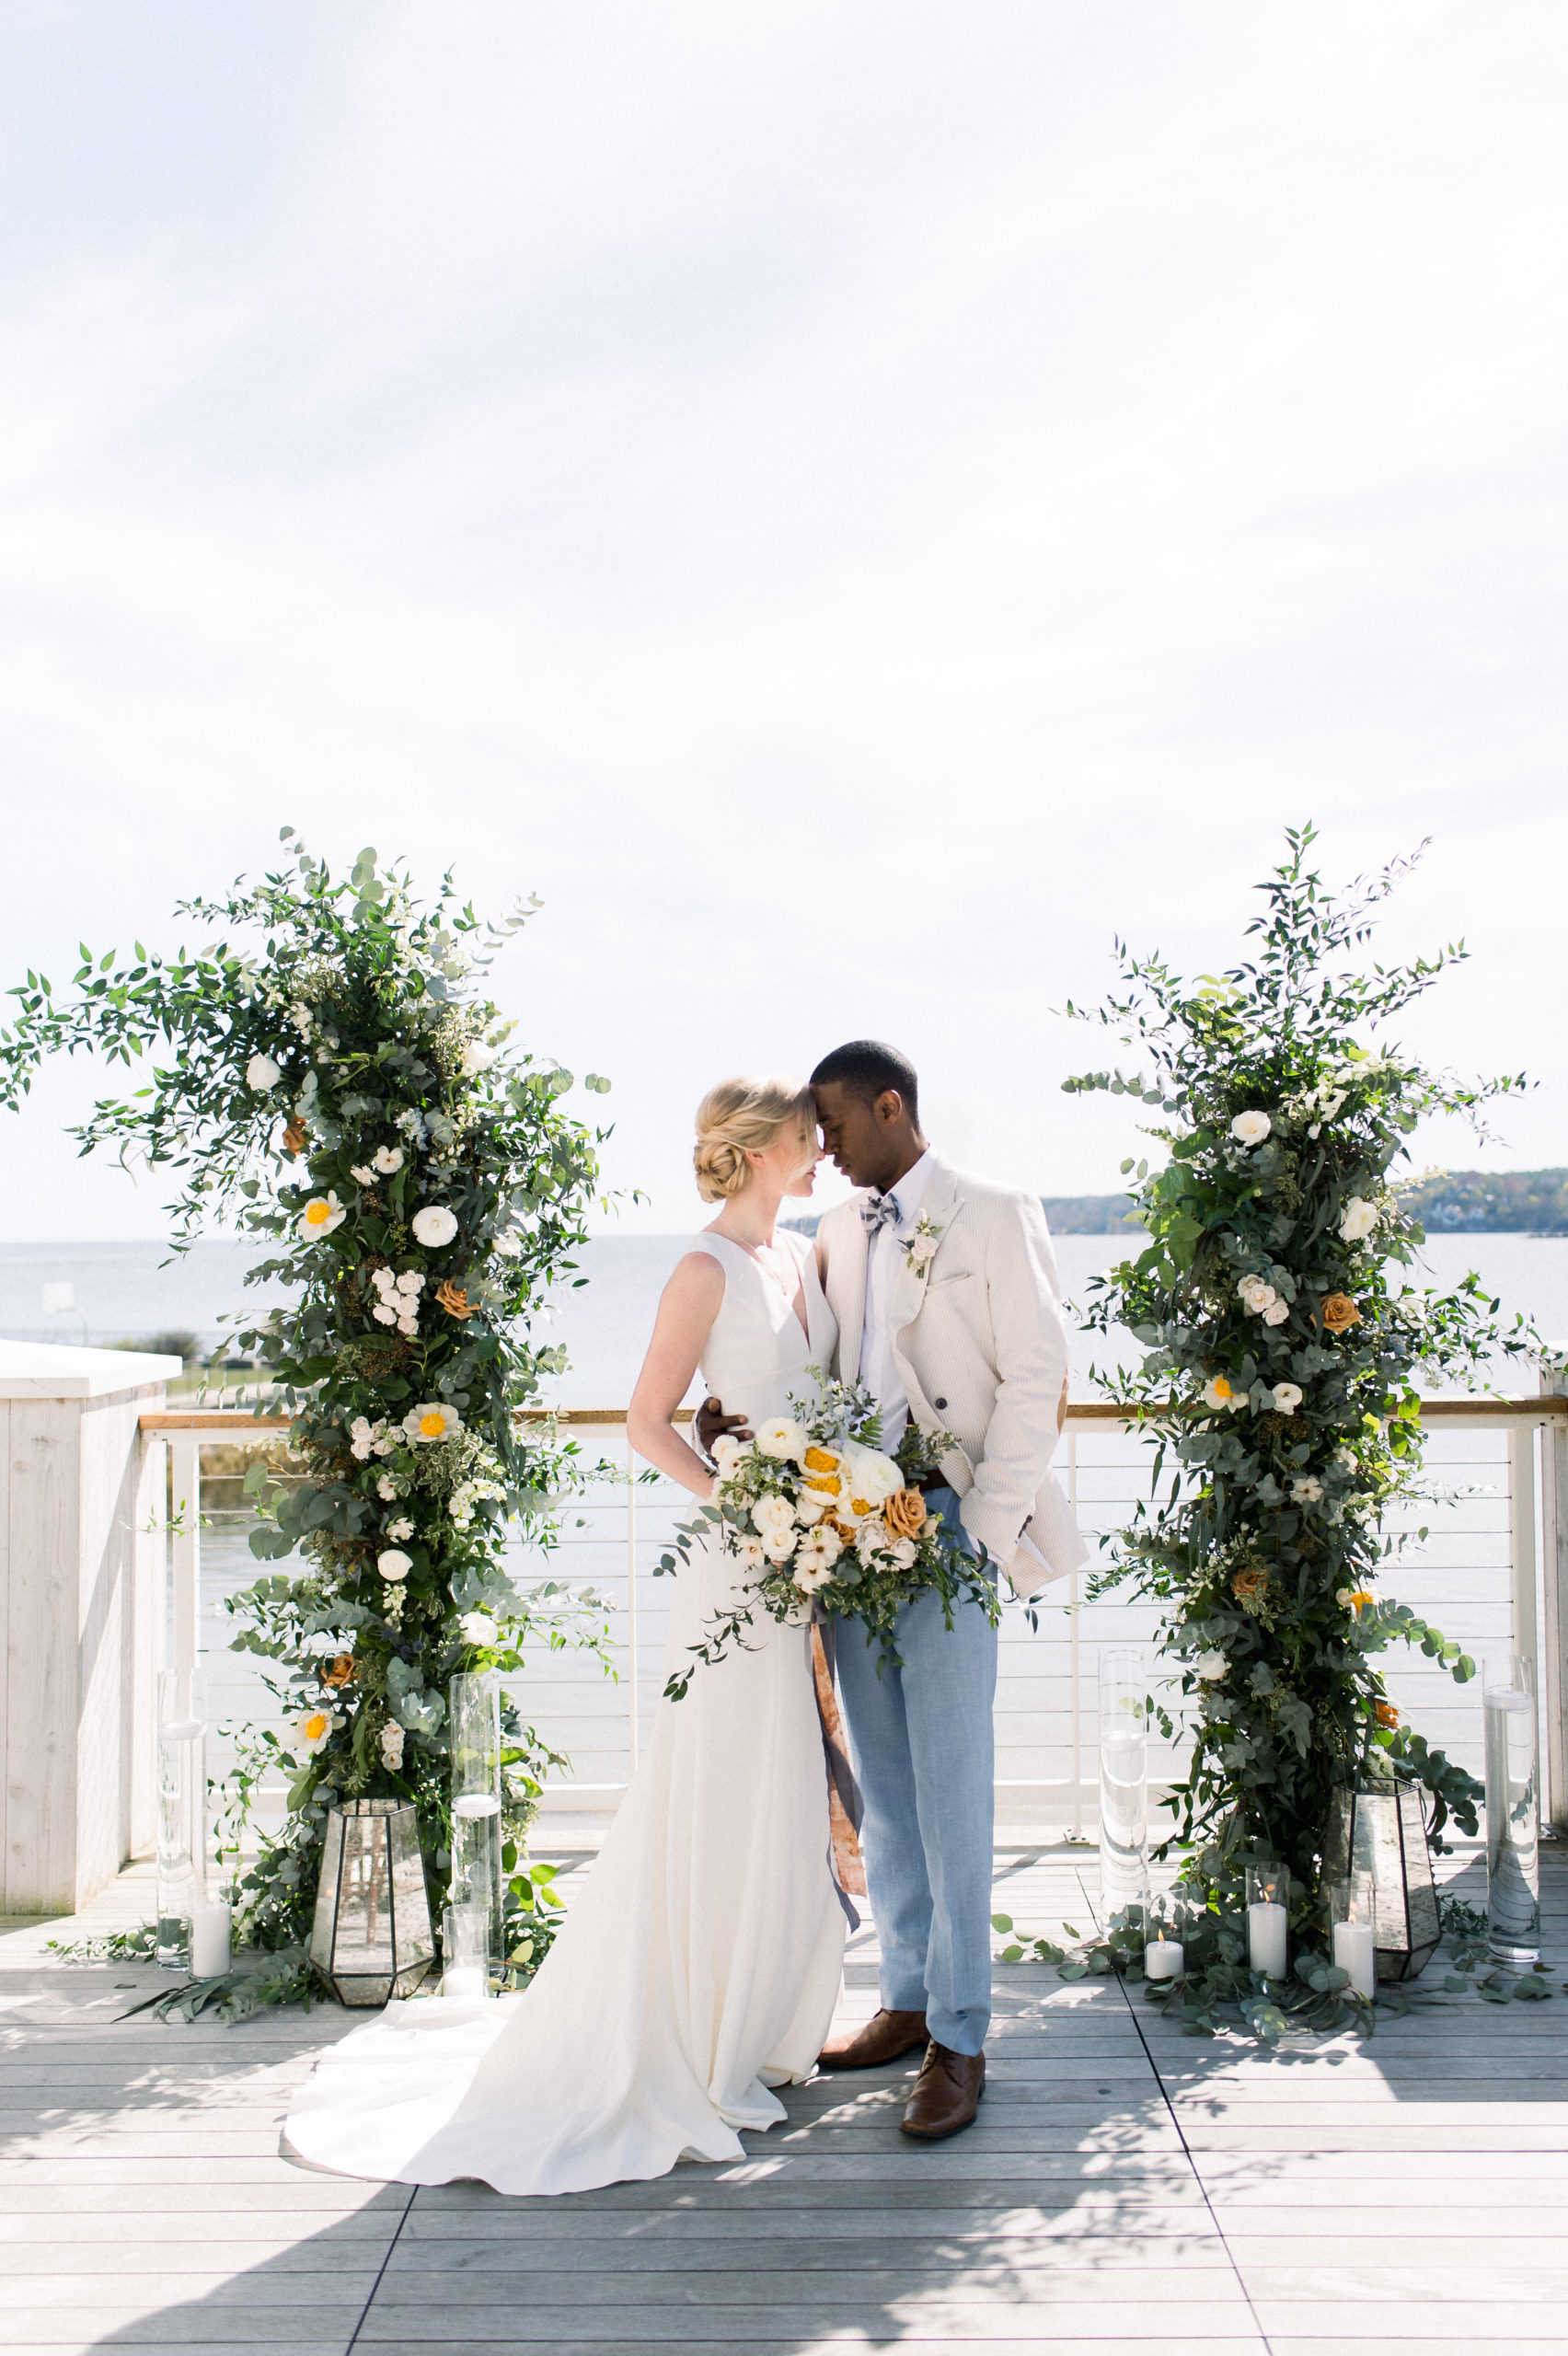 four tips to plan a wedding styled shoot